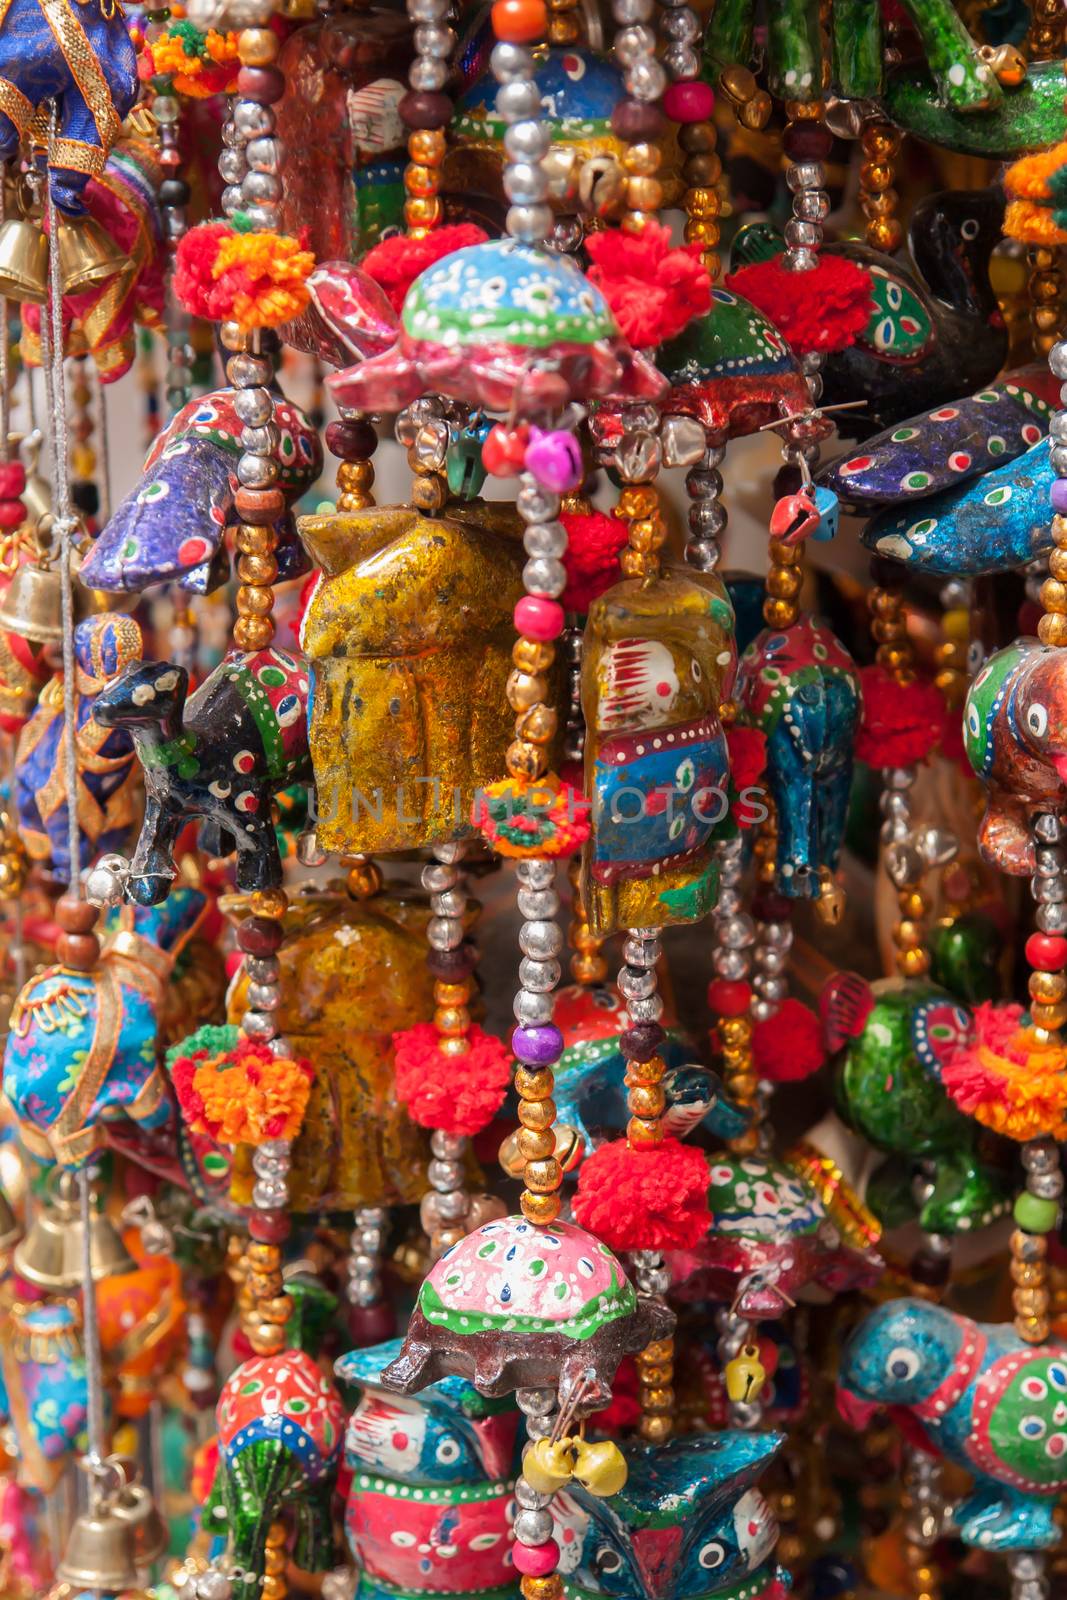 Colorful decorations market India by Ronyzmbow